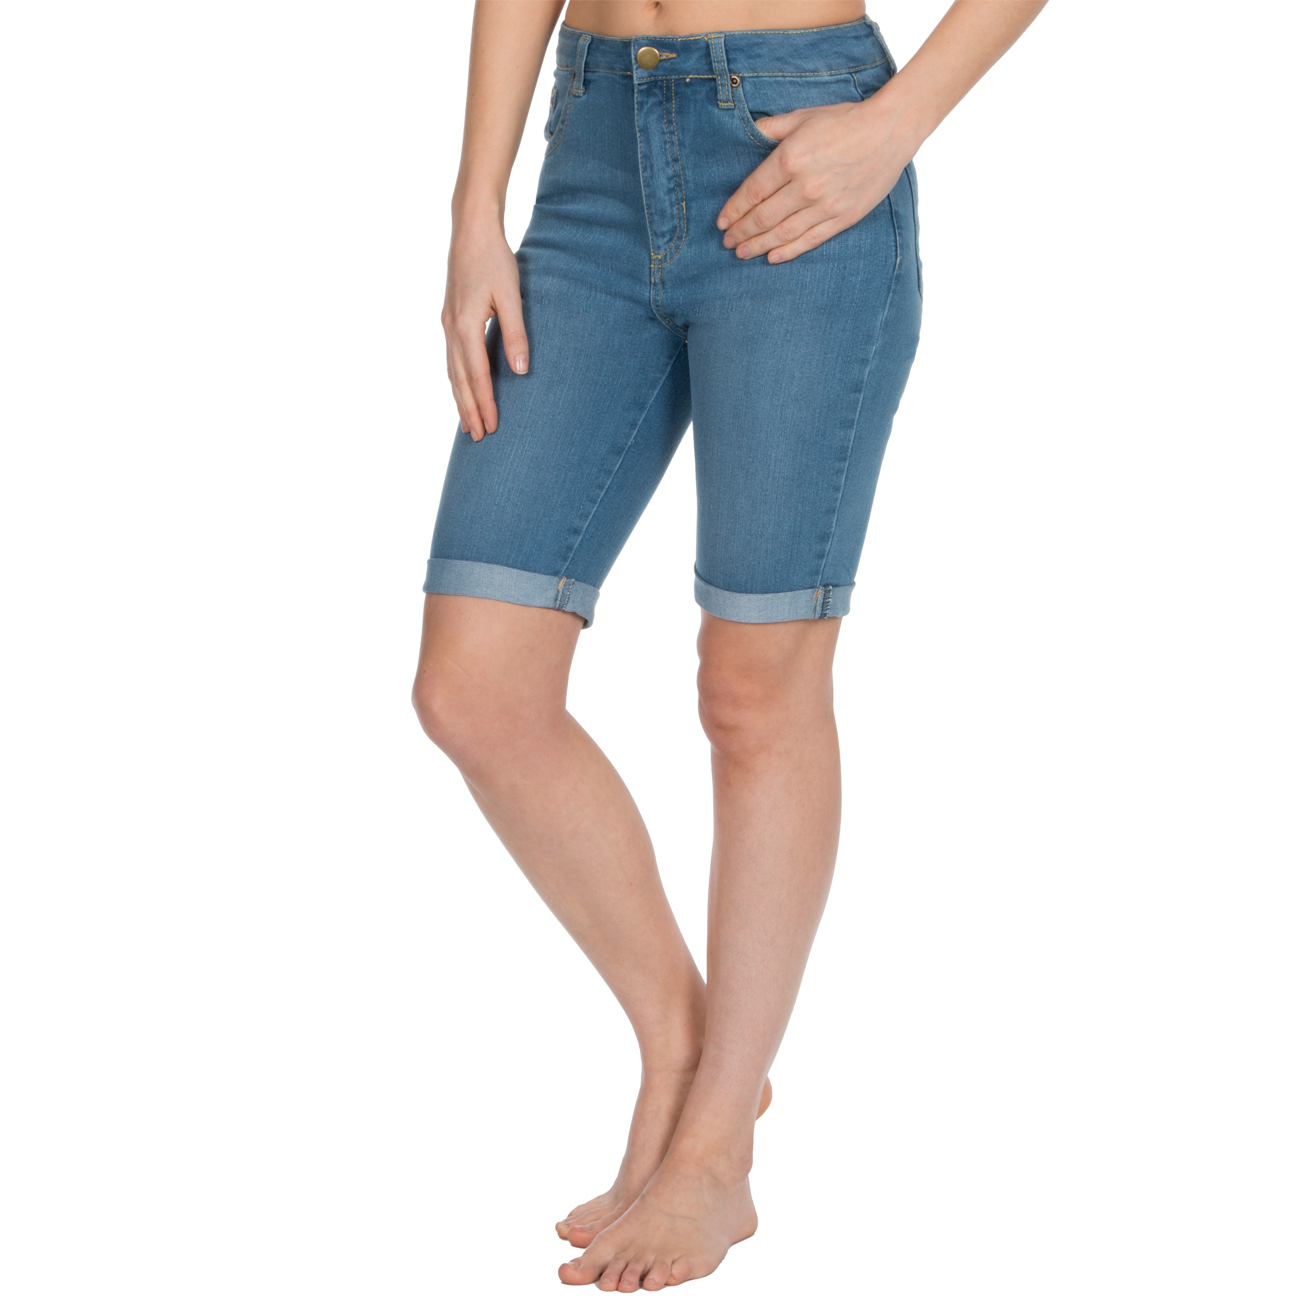 Womens Casual Summer Denim Candy Color Jean Shorts Hot Pants US Size S-XL